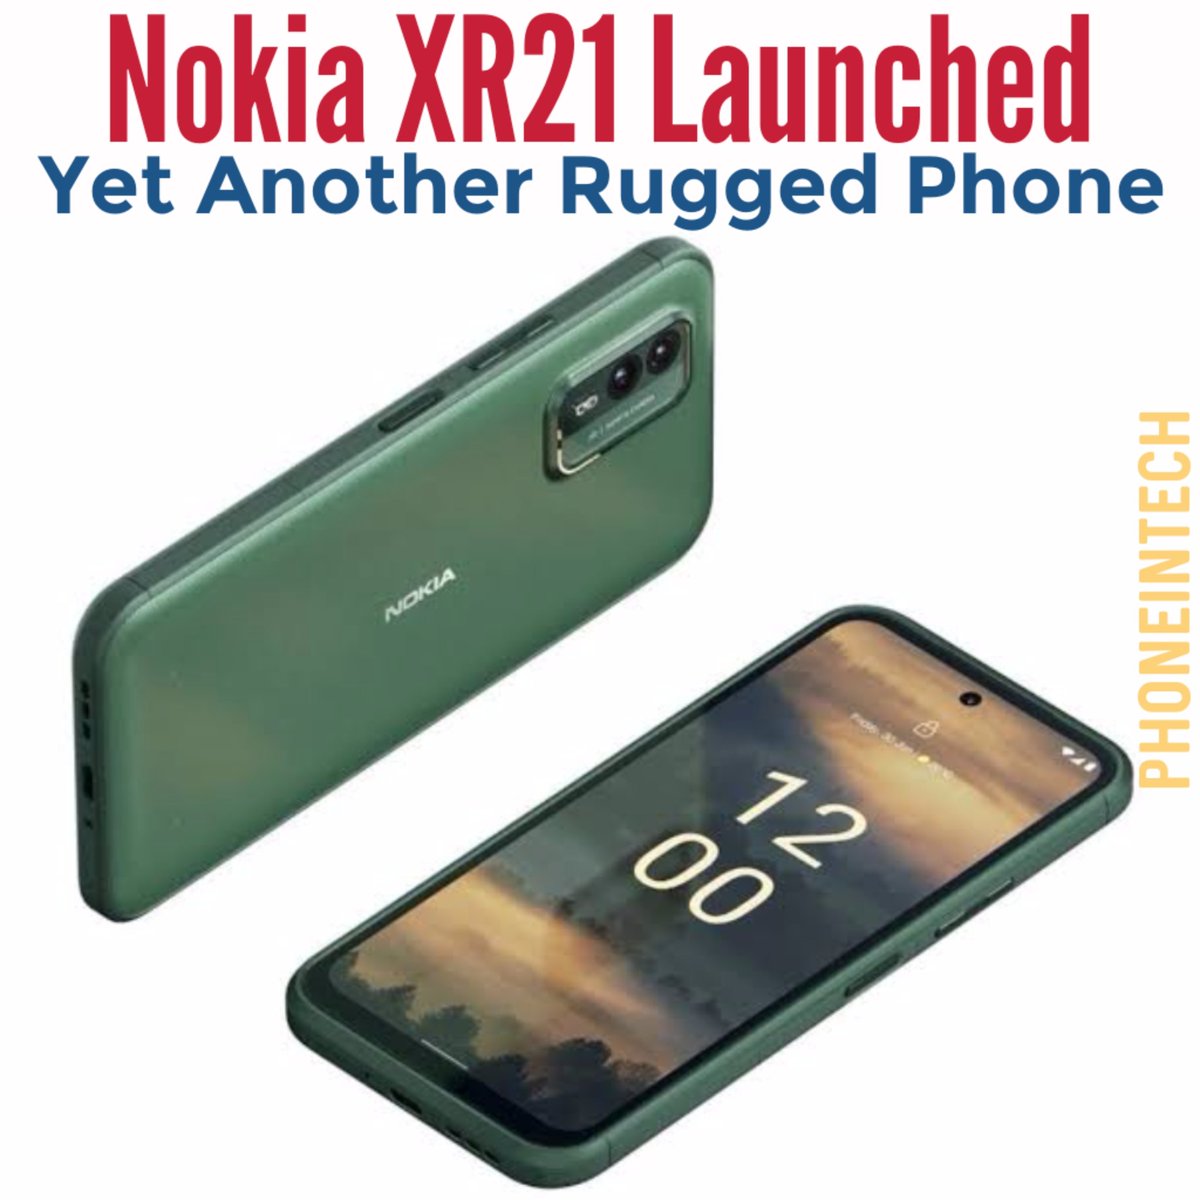 Nokia XR21 launched on Wednesday. It offers IP69K water and dust resistance. It features a 64 MP dual camera setup and a 6.49 inch Full HD+ IPS display. It runs on a Snapdragon 695 5G SoC and pricing starts at GBP 499.

#NokiaXR21 #NokiaSmartphones #PhoneinTech